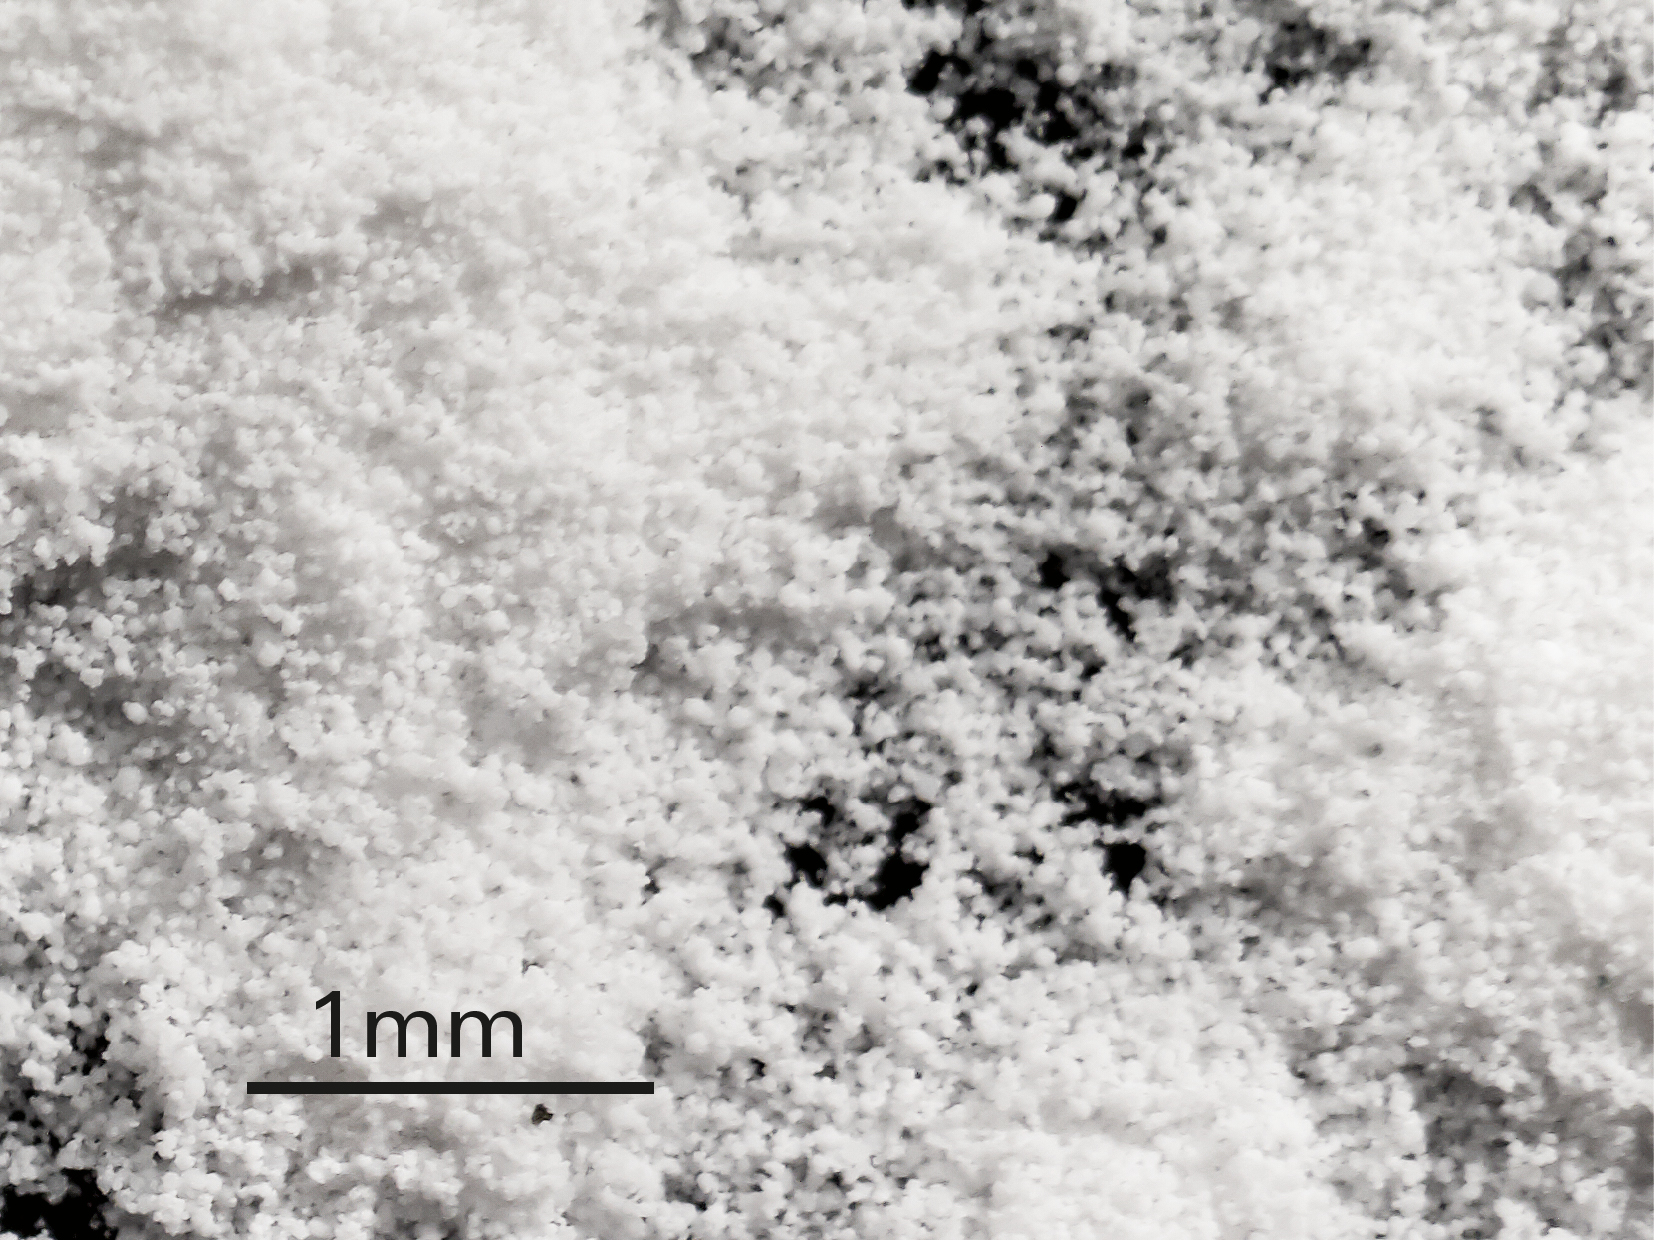 Calcium carbonate particles with a spherical shape (1 mm)